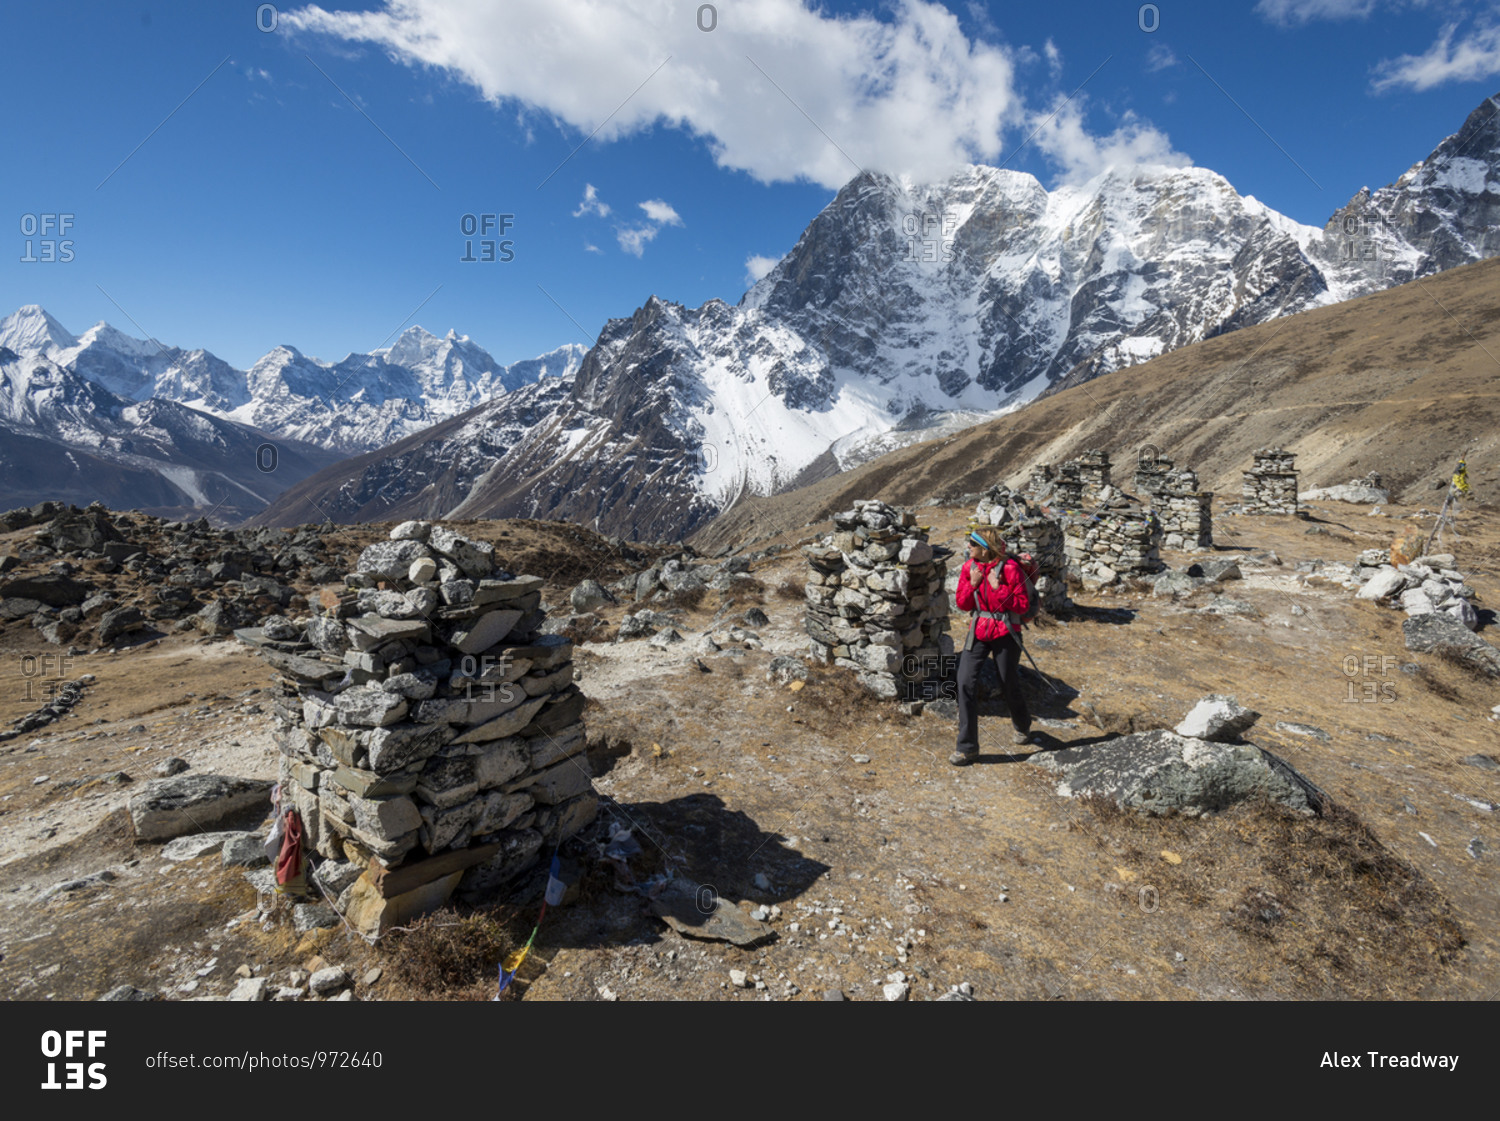 A woman makes her way up to Everest base camp in the Khumbu region of Nepal